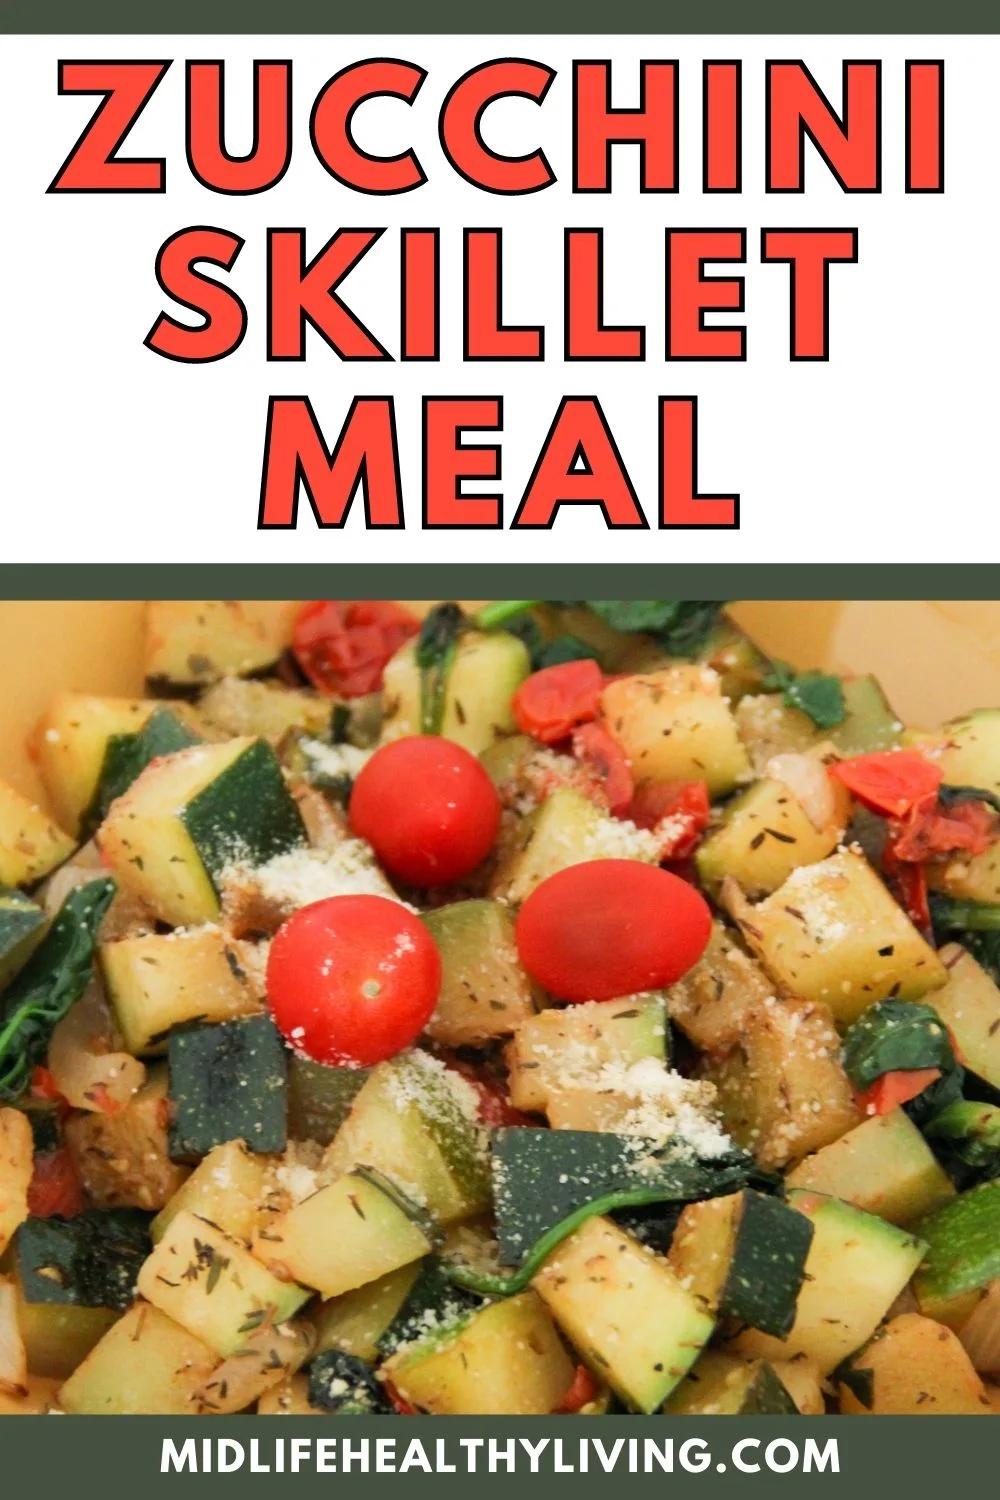 Pinterest image for Zucchini skillet meal recipe